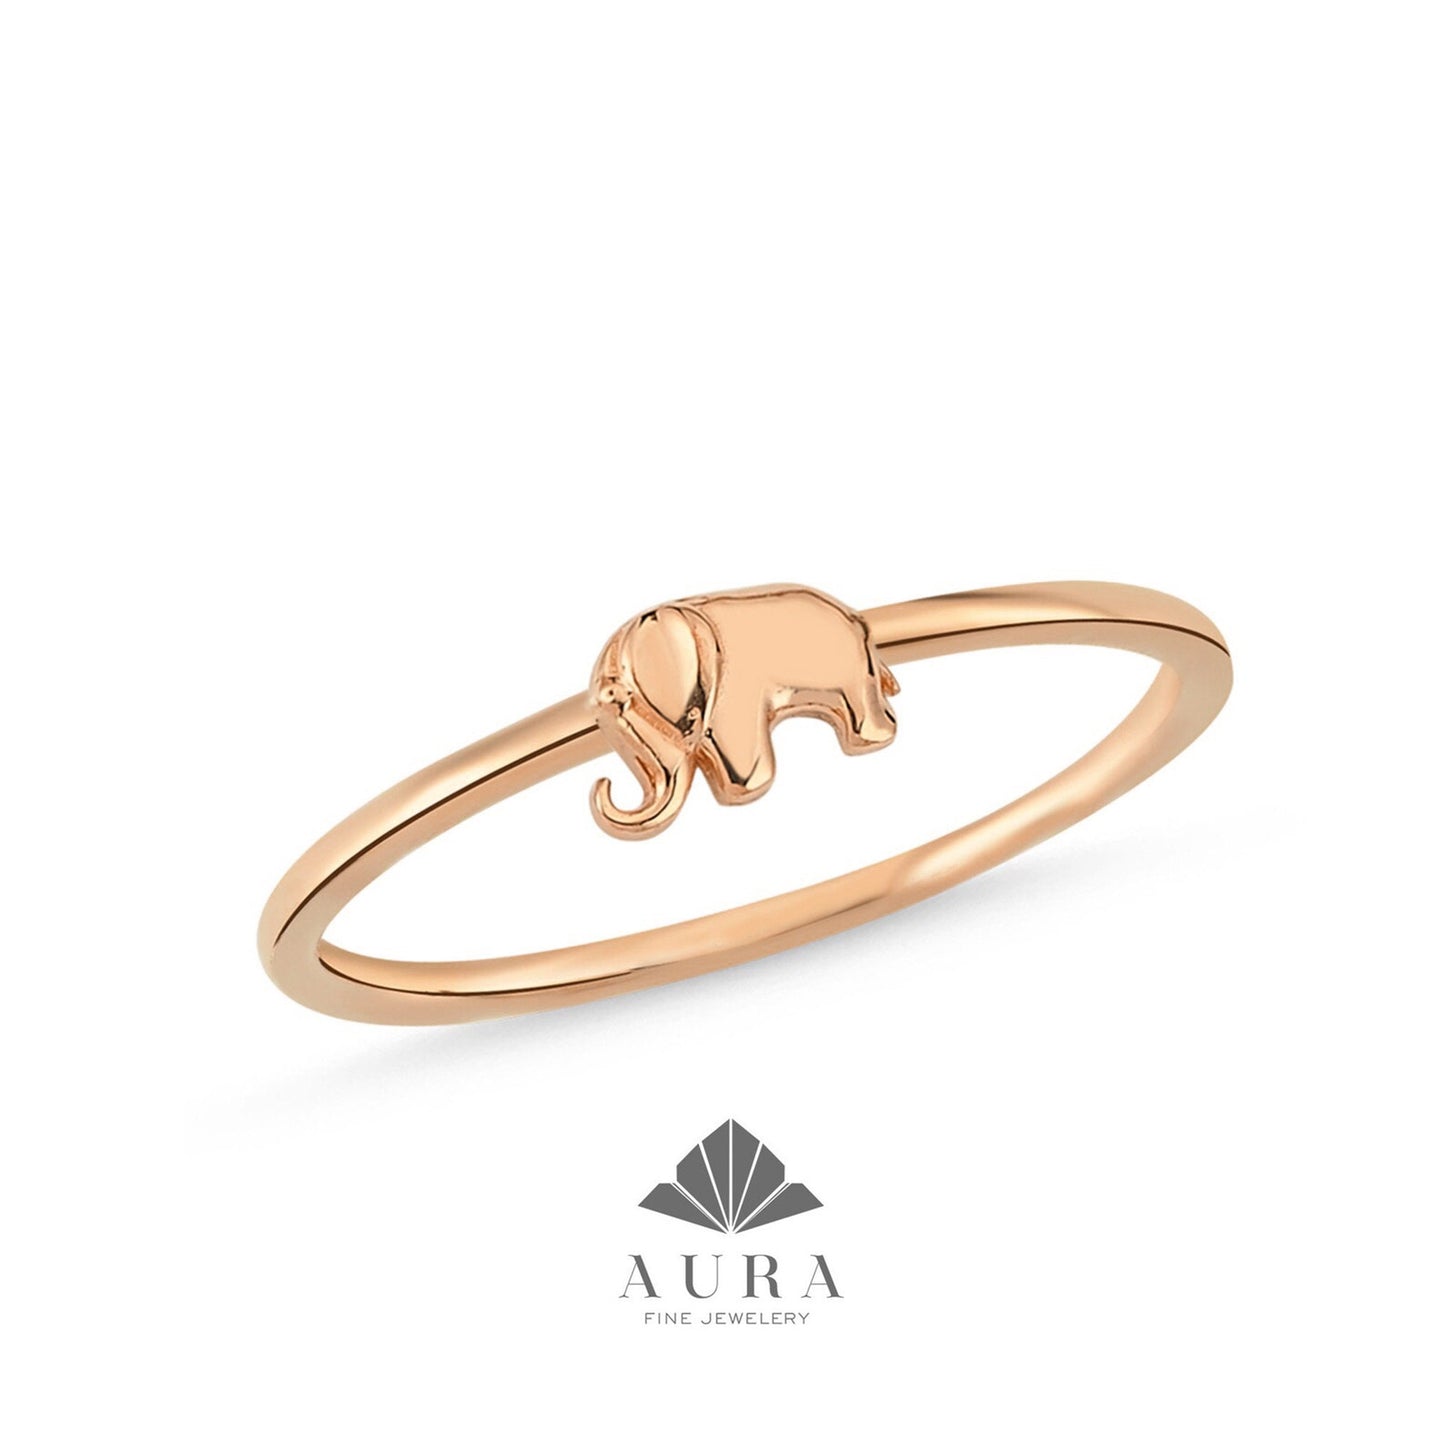 14K Gold Elephant Ring, Stacking Dainty Band, Animal Gold Ring, Good Fortune Symbol, Unique Elephant Ring, Gift for Her